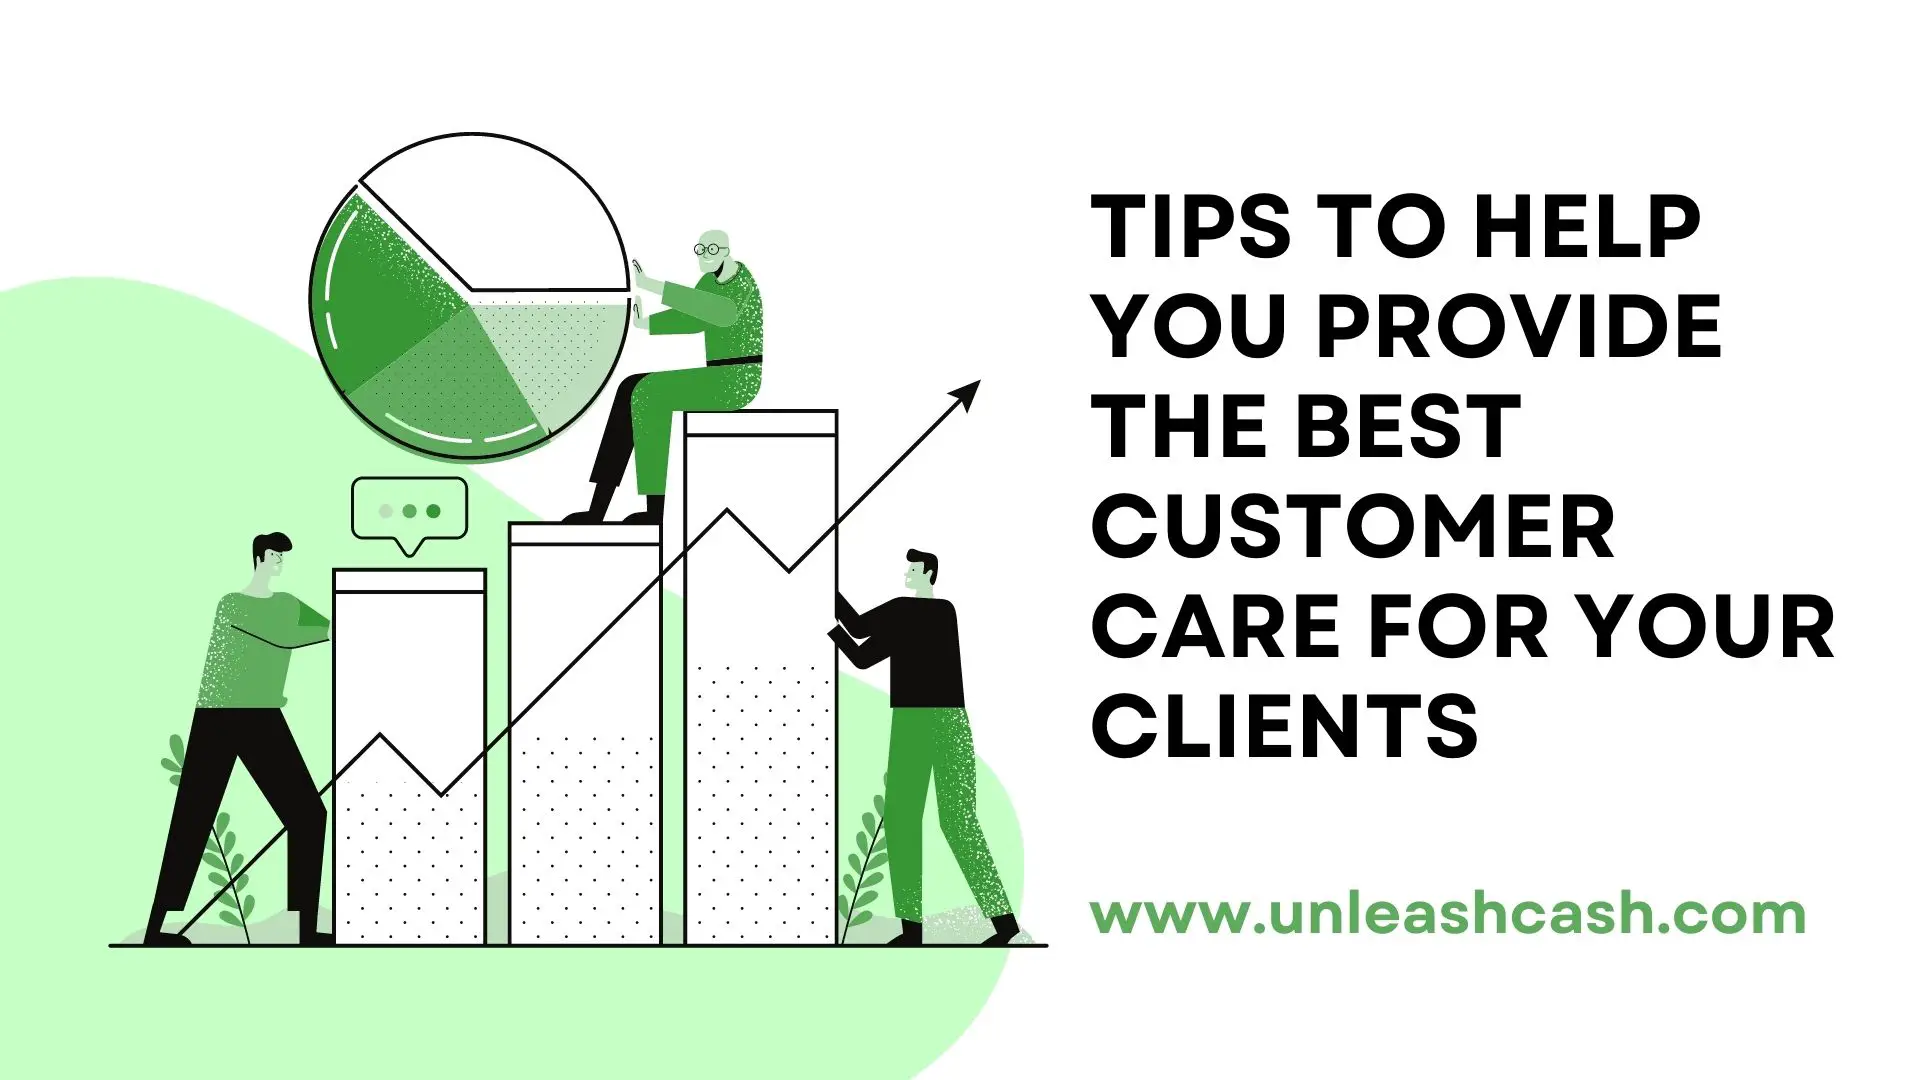 Tips To Help You Provide The Best Customer Care For Your Clients